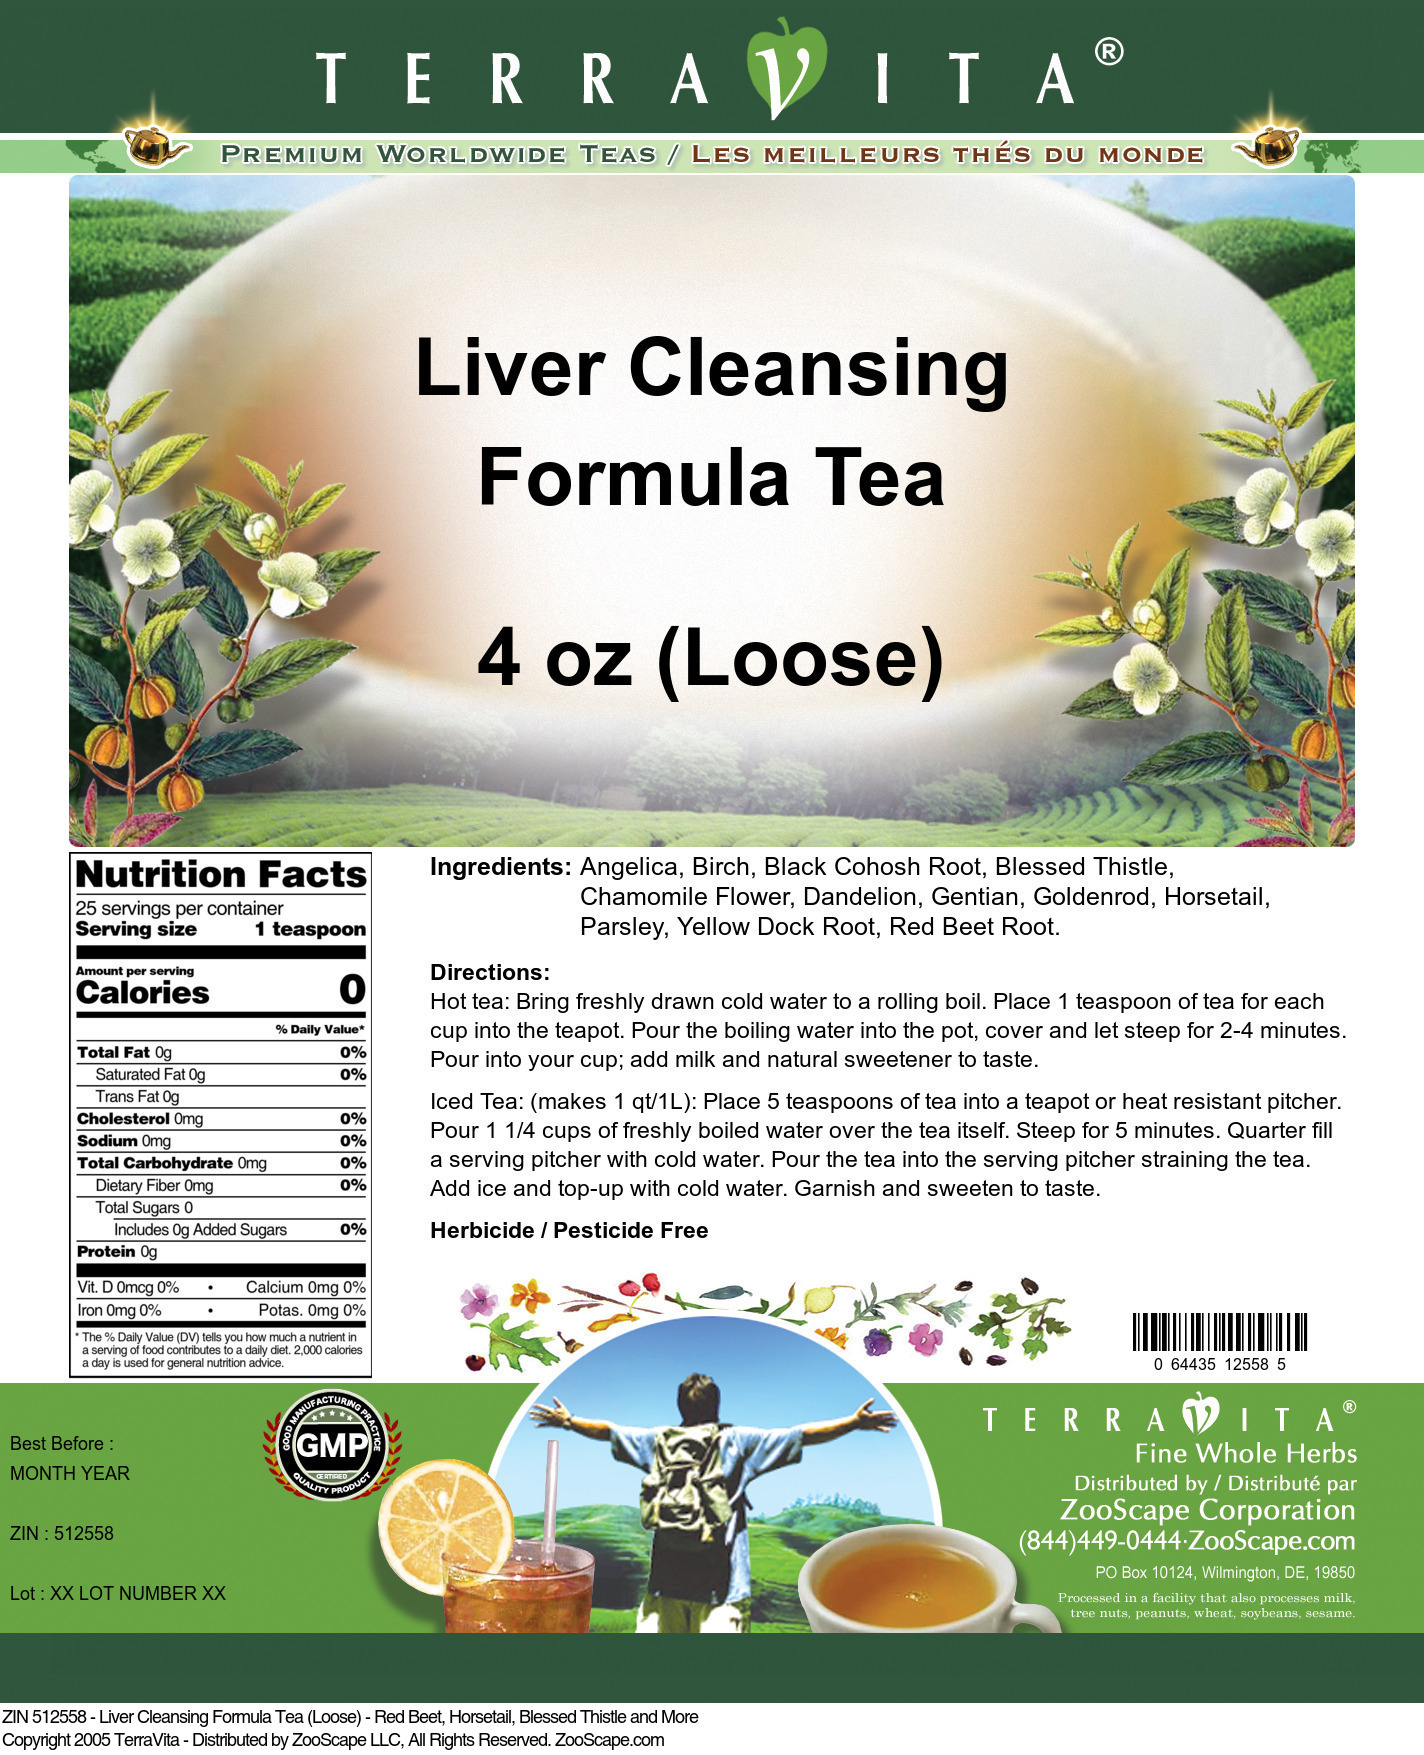 Liver Cleansing Formula Tea (Loose) - Red Beet, Horsetail, Blessed Thistle and More - Label